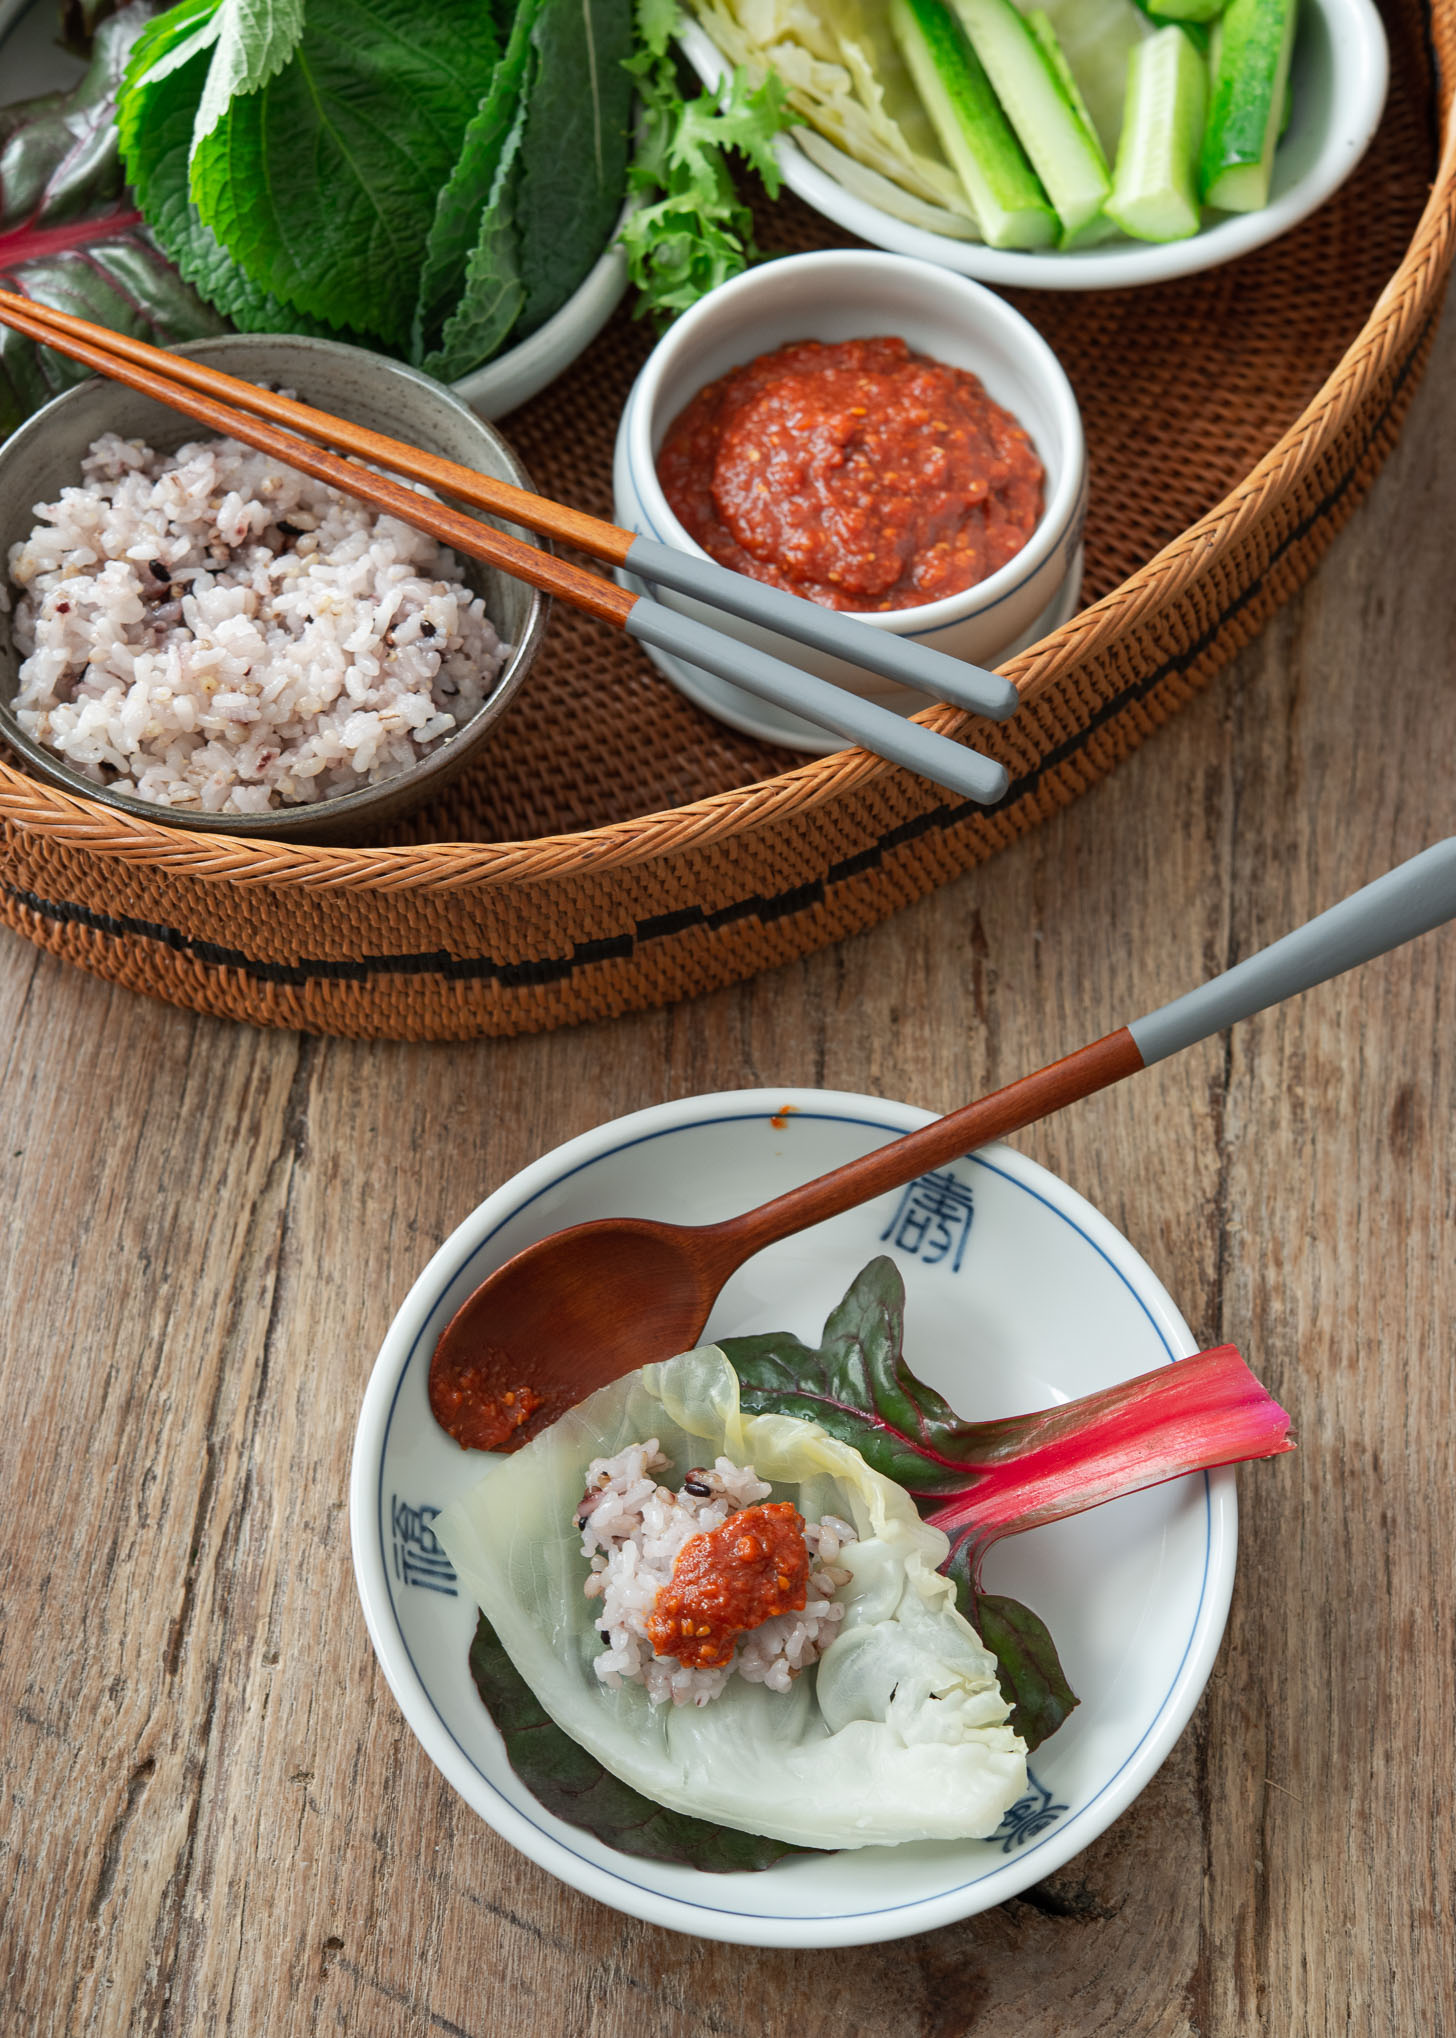 A dollop of ssamjang is placed on top of rice and vegetables.